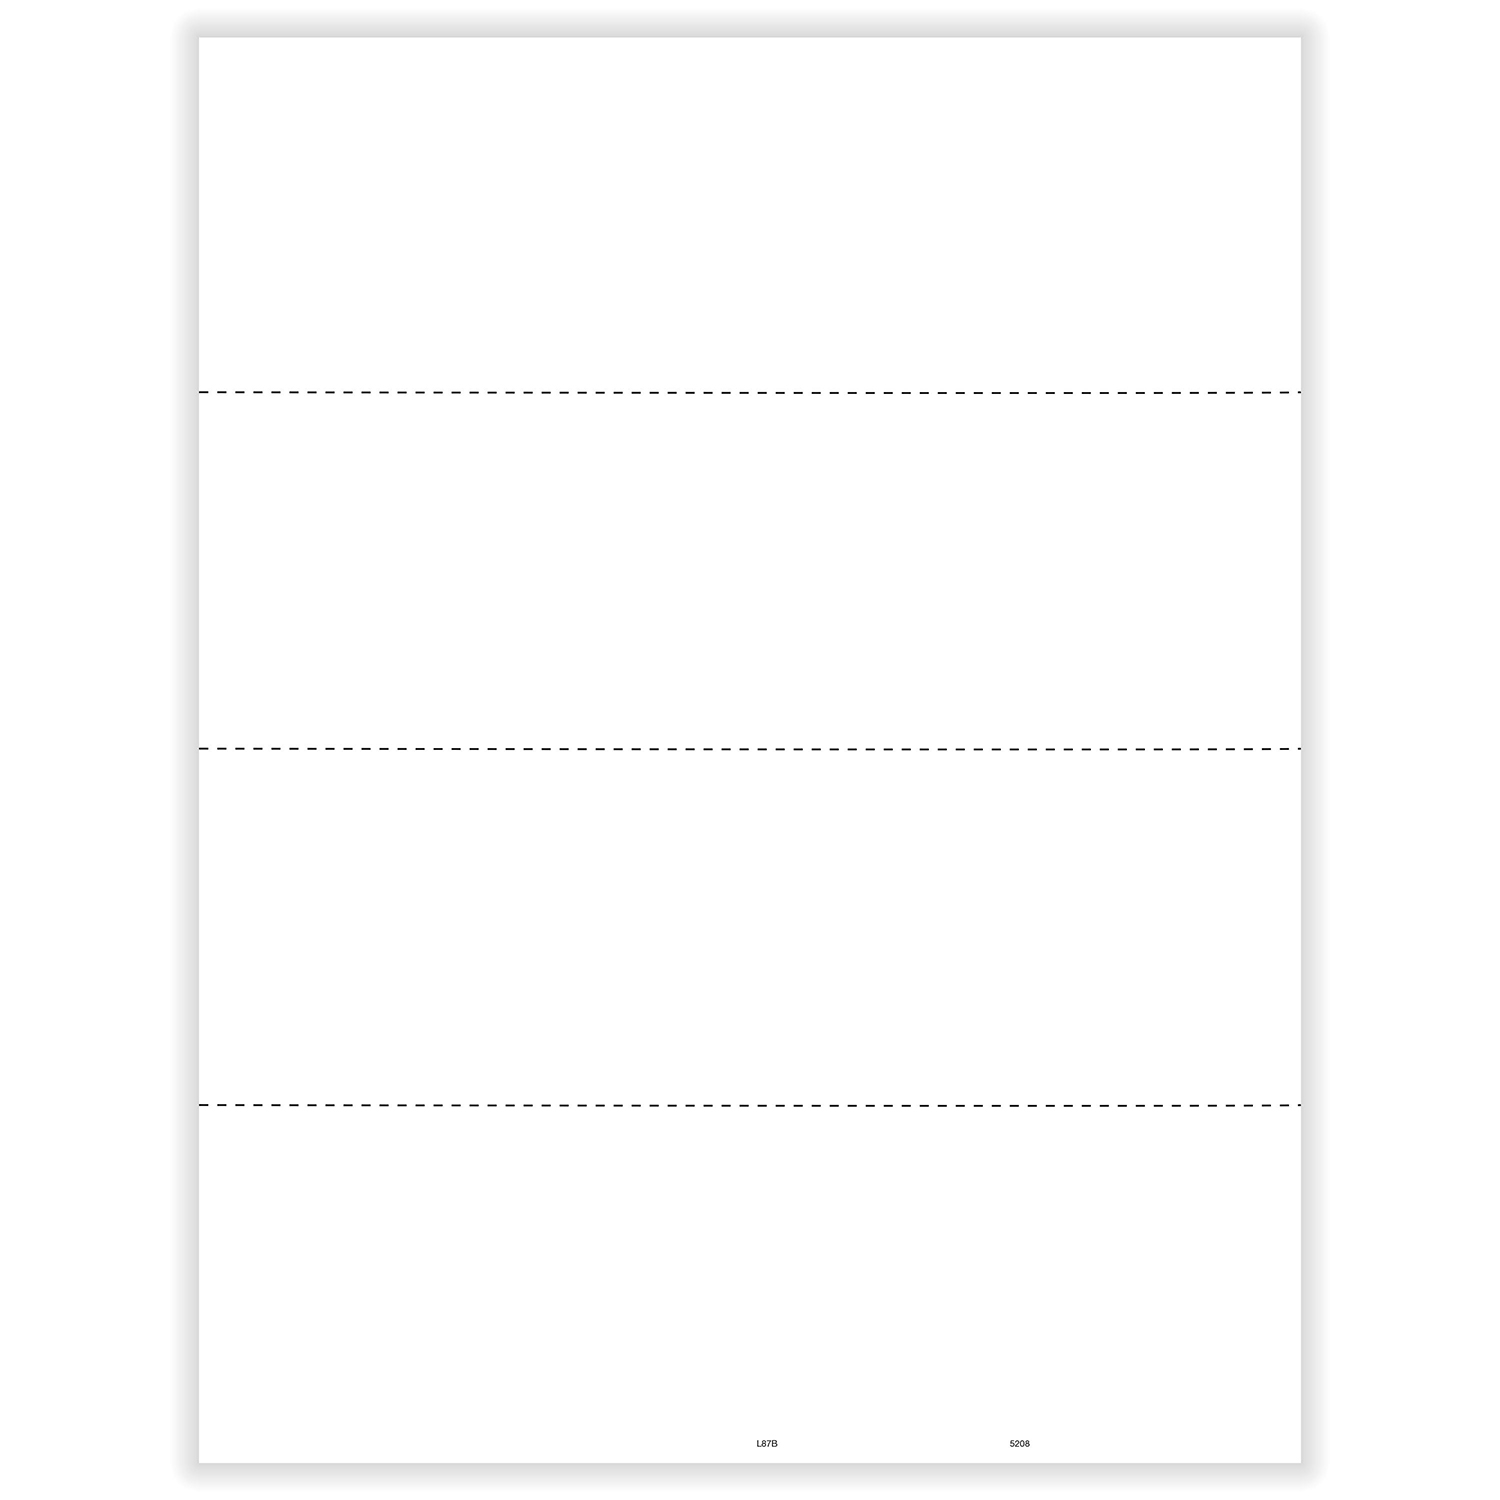 Picture of W-2 Blank, 4-Up, Horizontal w/ Backer Instructions (500 Forms)